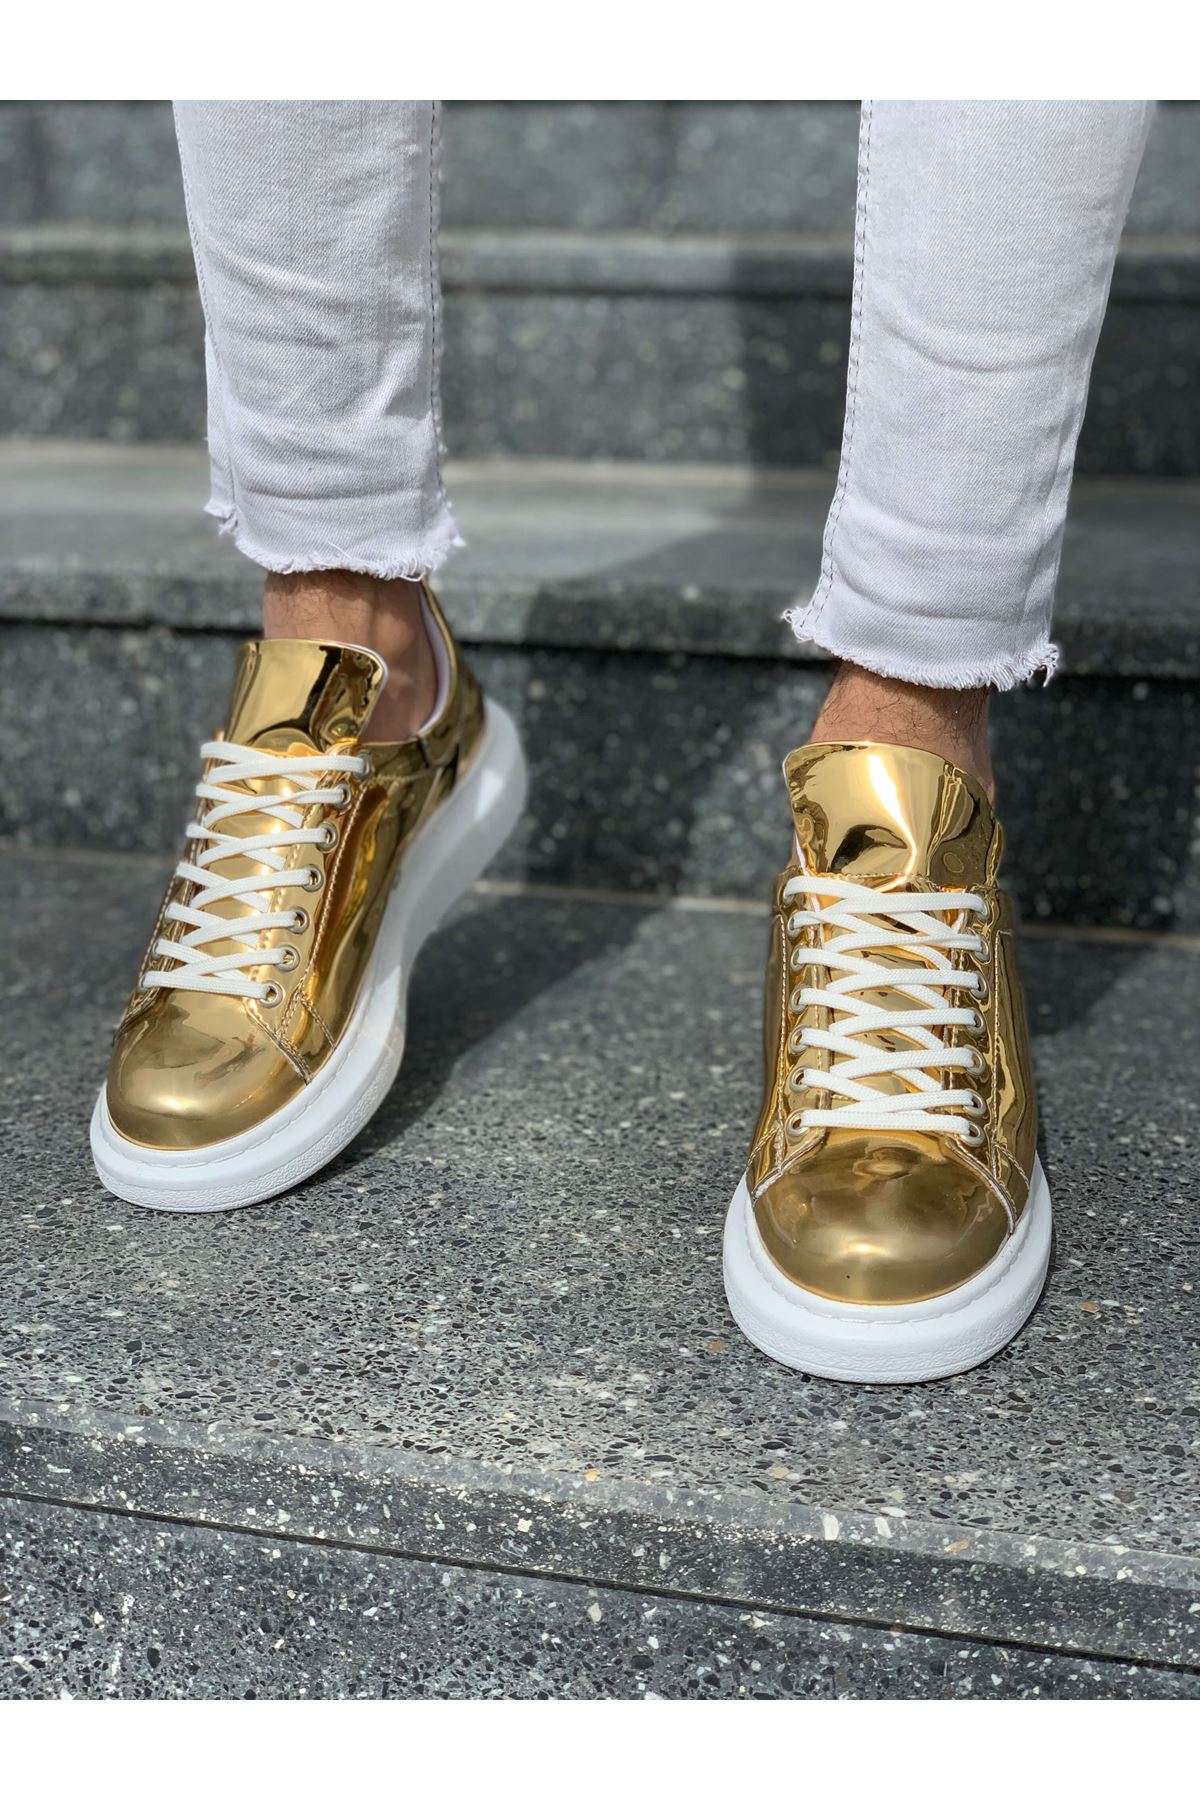 Chekich Men's Shoes Gold Color Polished Non Leather Lace Up Luxury Hot Sale Summer Autumn Yellow Mirror Flexible Sneakers Office Daily Odorless Walking Sport Light Breathable Air White Sewing Sole Vulcanized New CH260